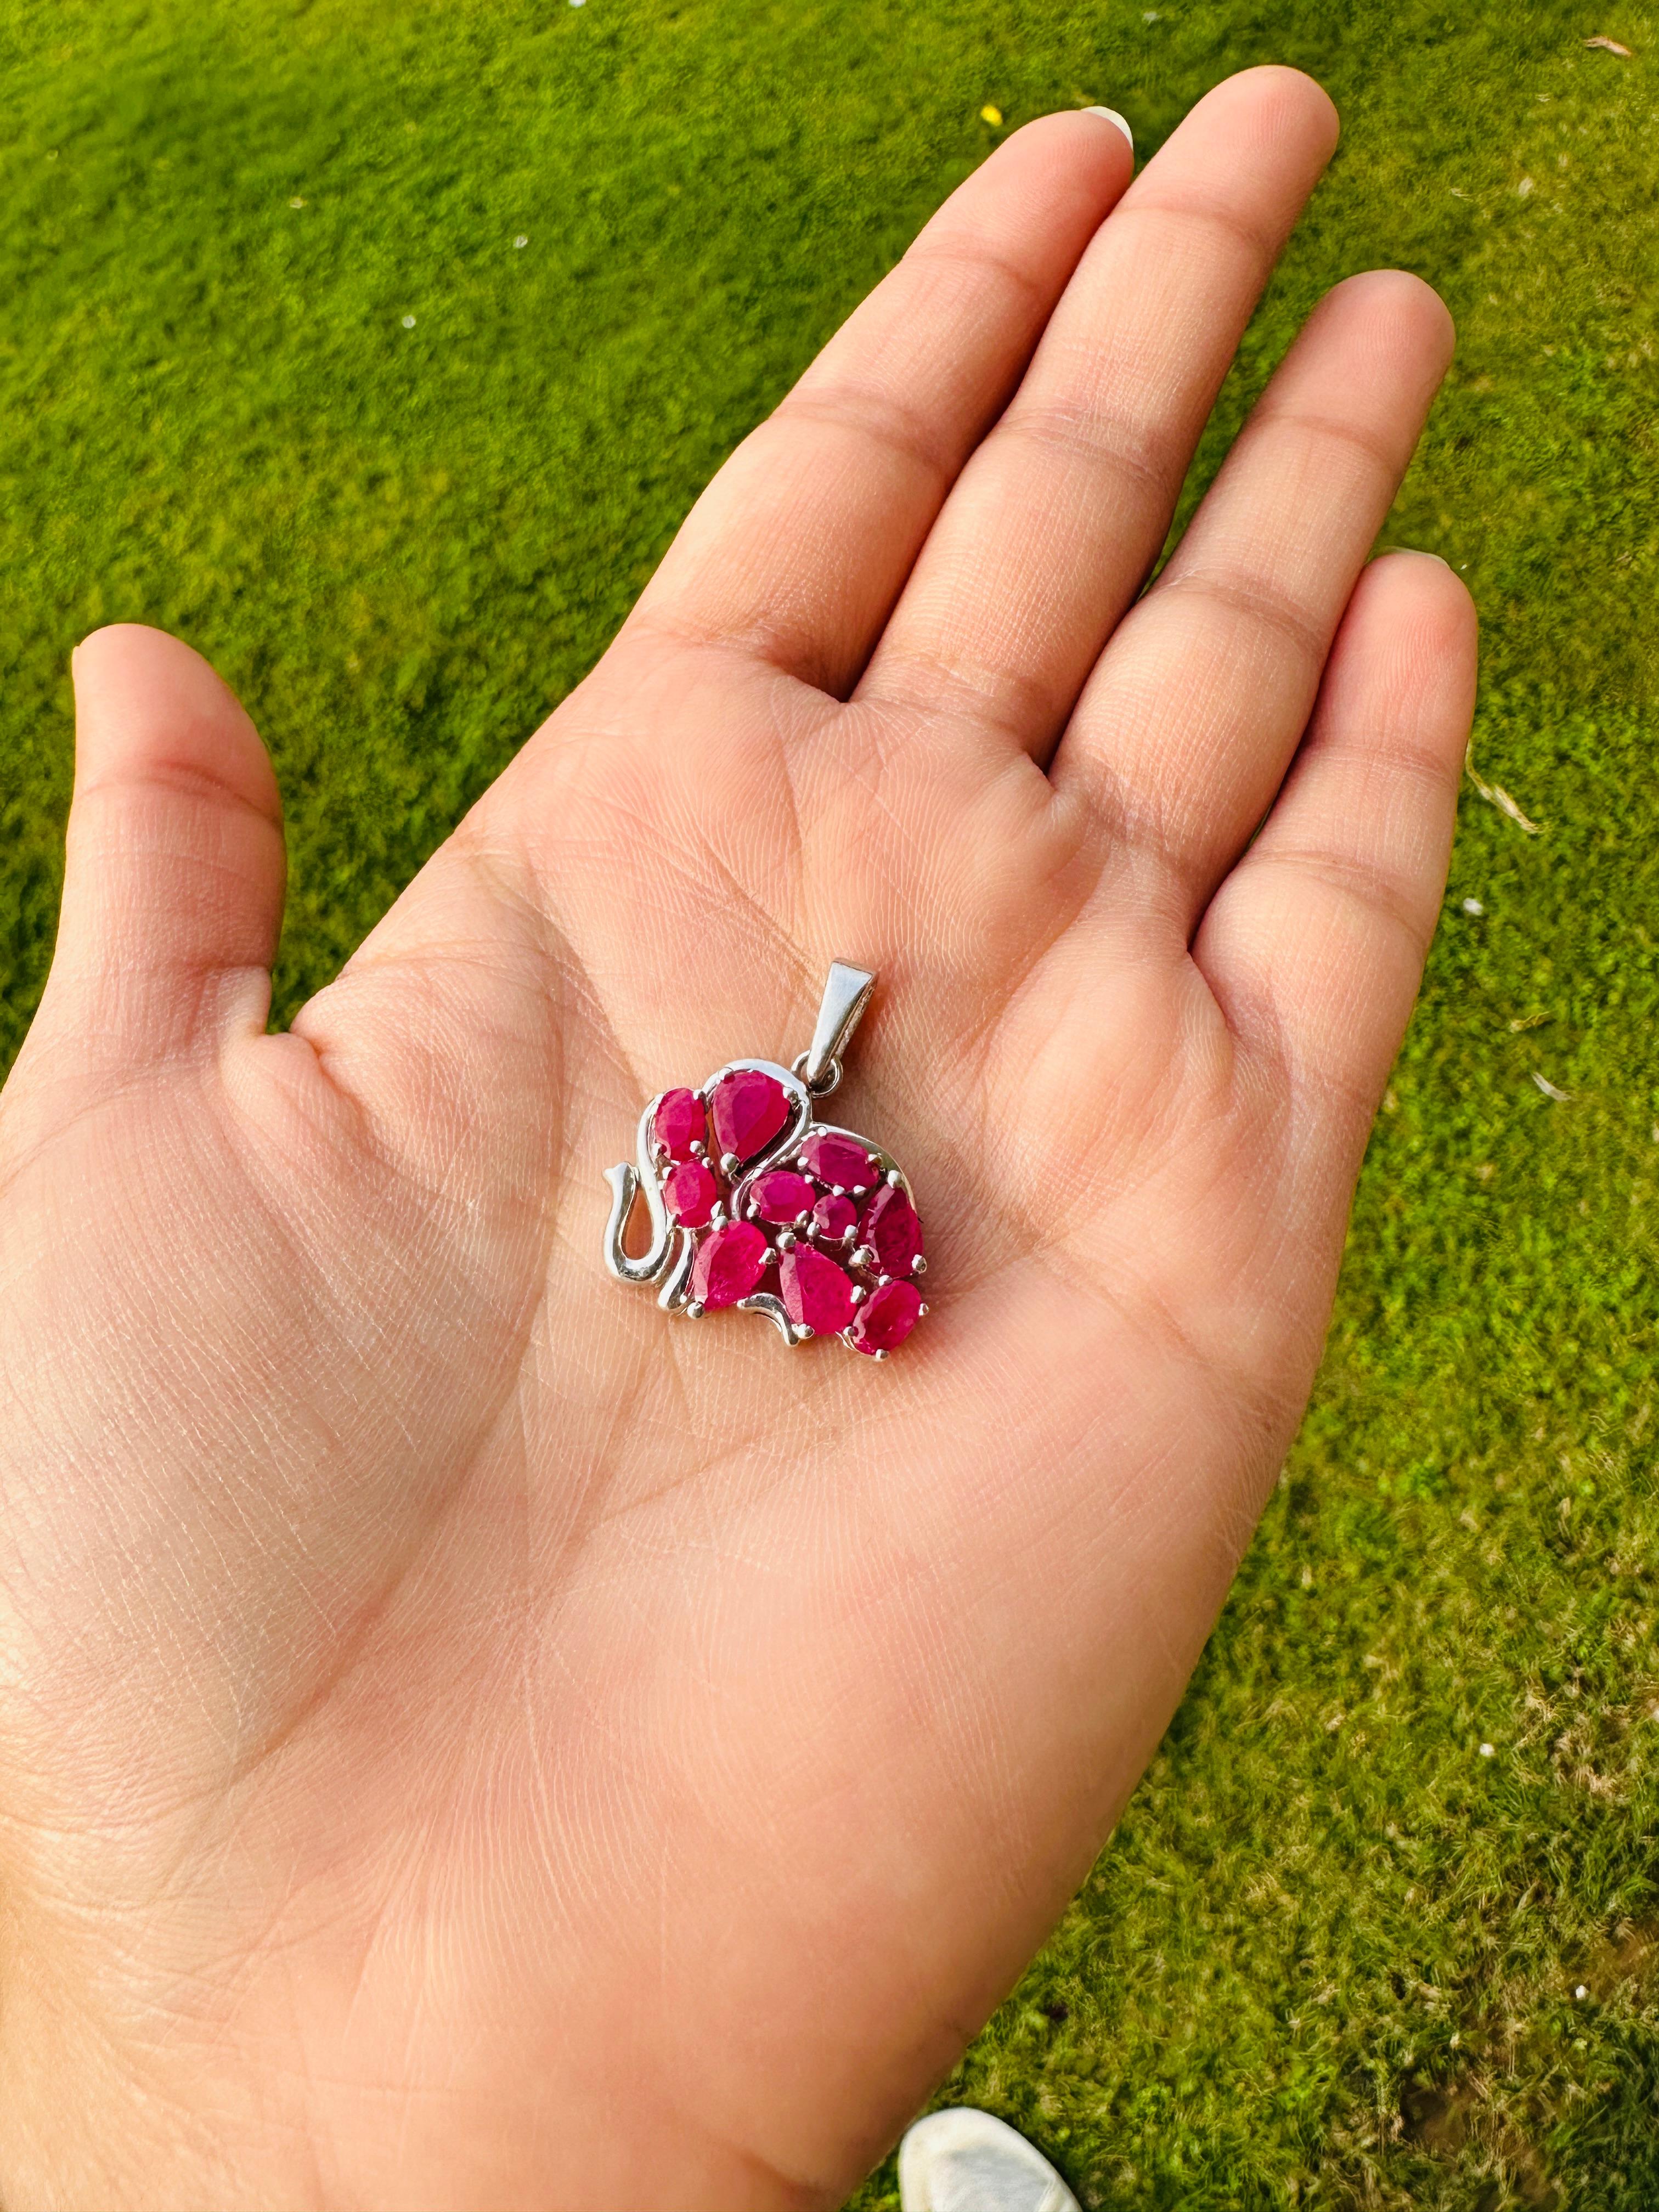 This Ruby Elephant Pendant Gifts is meticulously crafted from the finest materials and adorned with stunning ruby which enhances confidence, leadership qualities and attract career opportunities.
This delicate to statement pendants, suits every